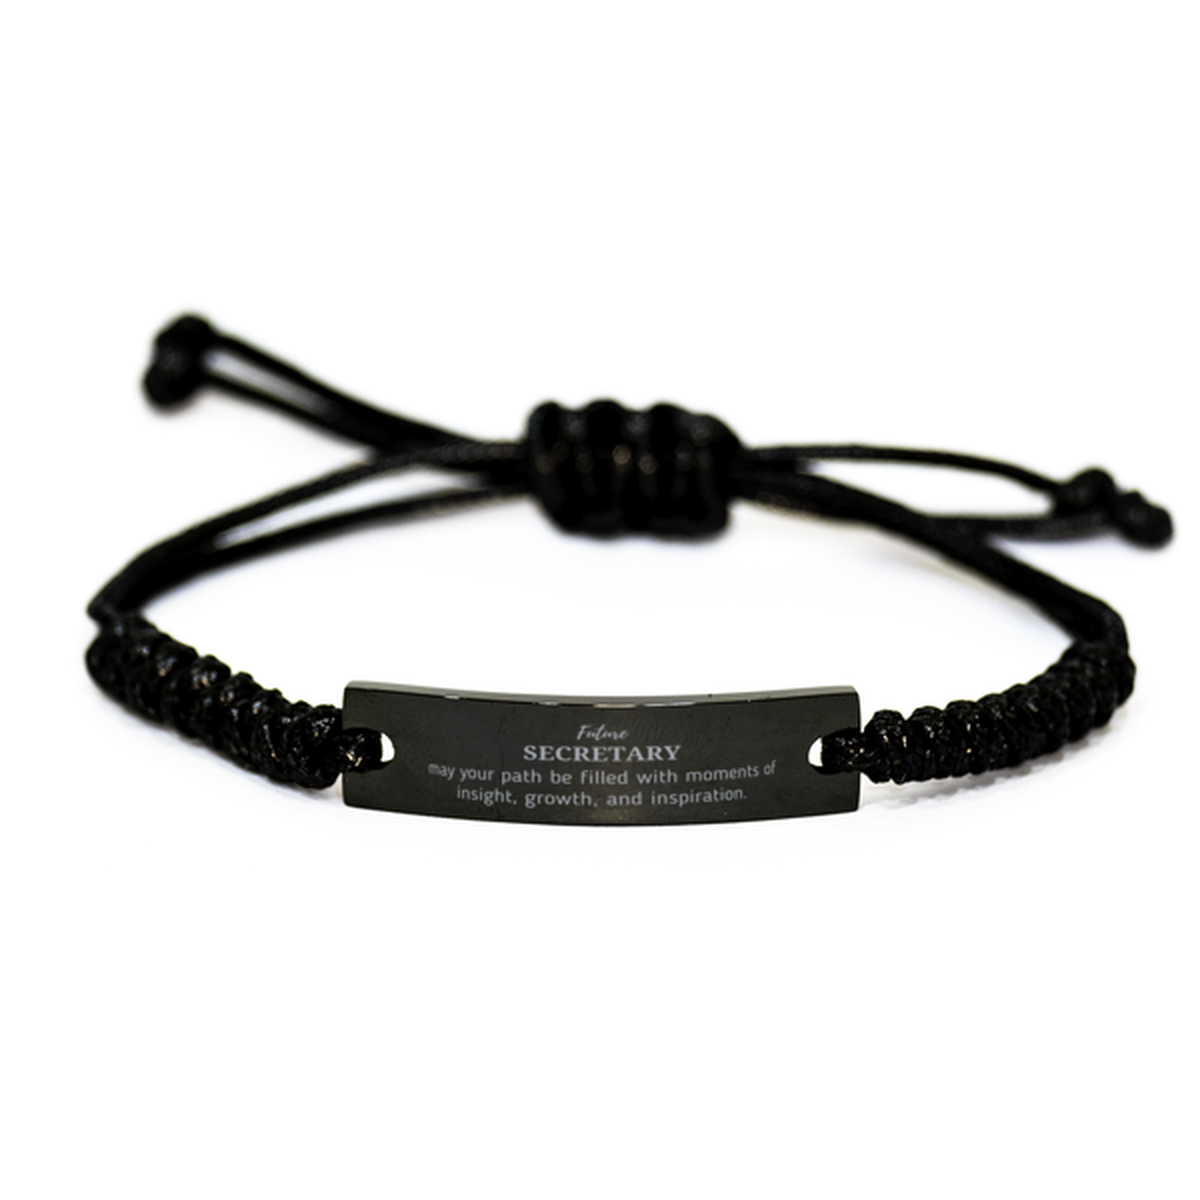 Future Secretary Gifts, May your path be filled with moments of insight, Graduation Gifts for New Secretary, Christmas Unique Black Rope Bracelet For Men, Women, Friends